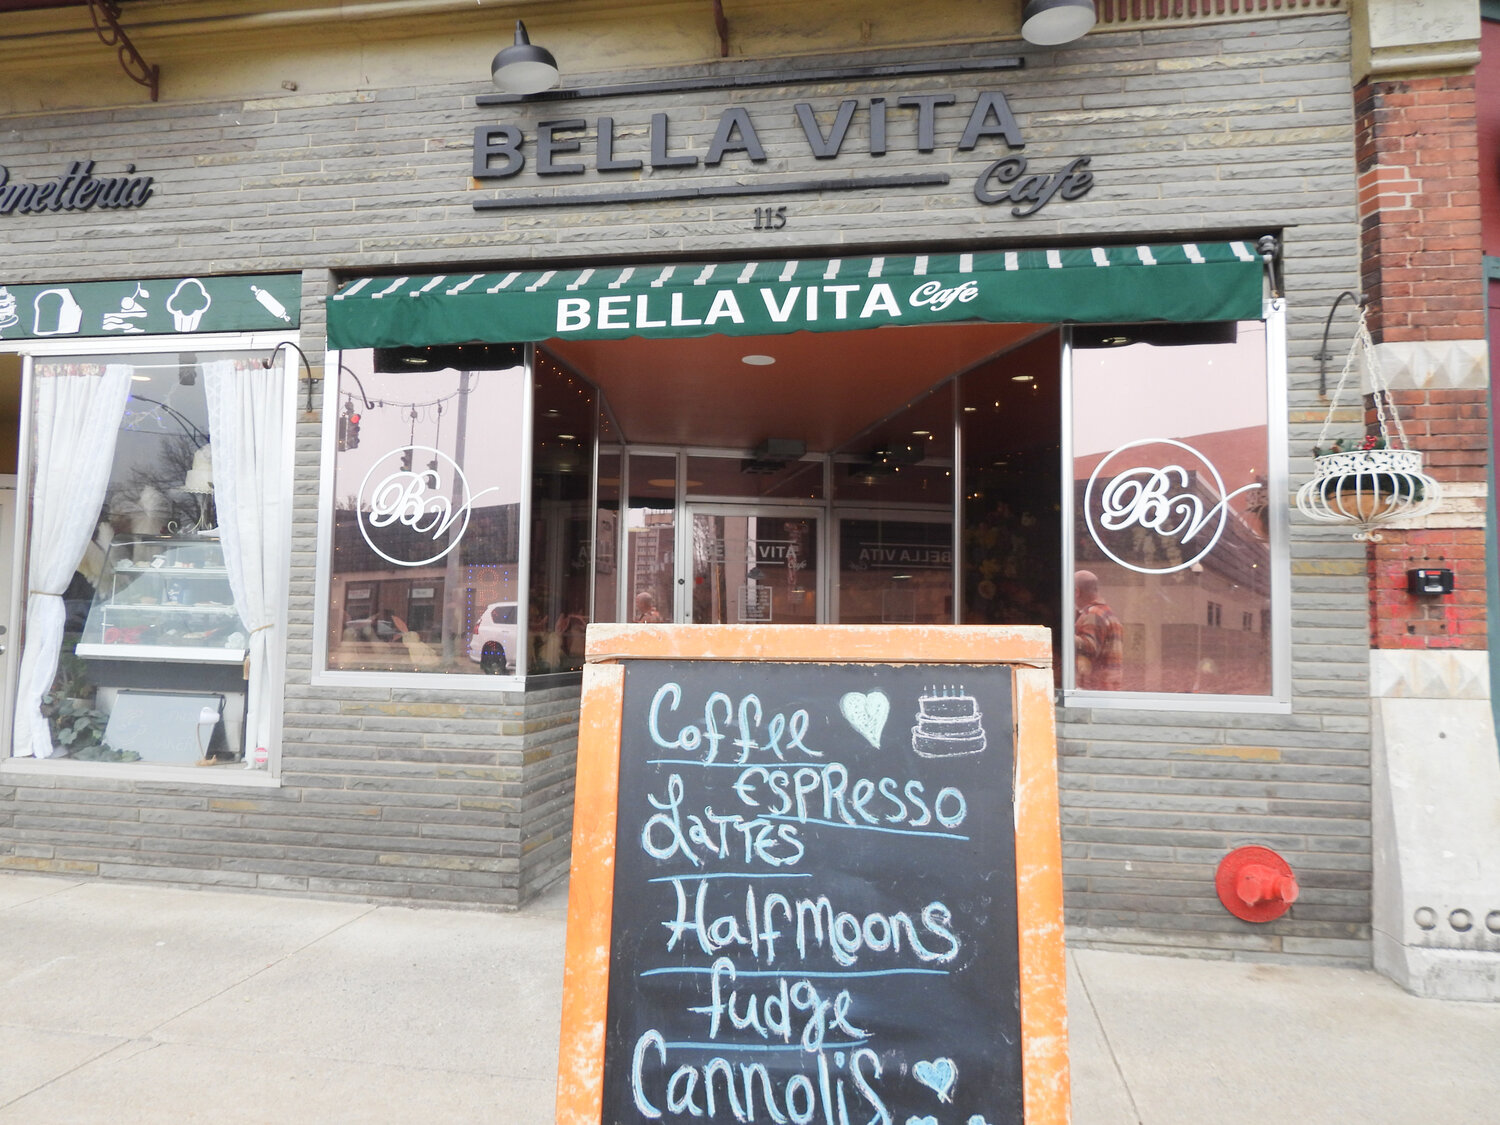 Bella Vita in Oneida offers all manner of drinks and sweets needed to get you through the day.